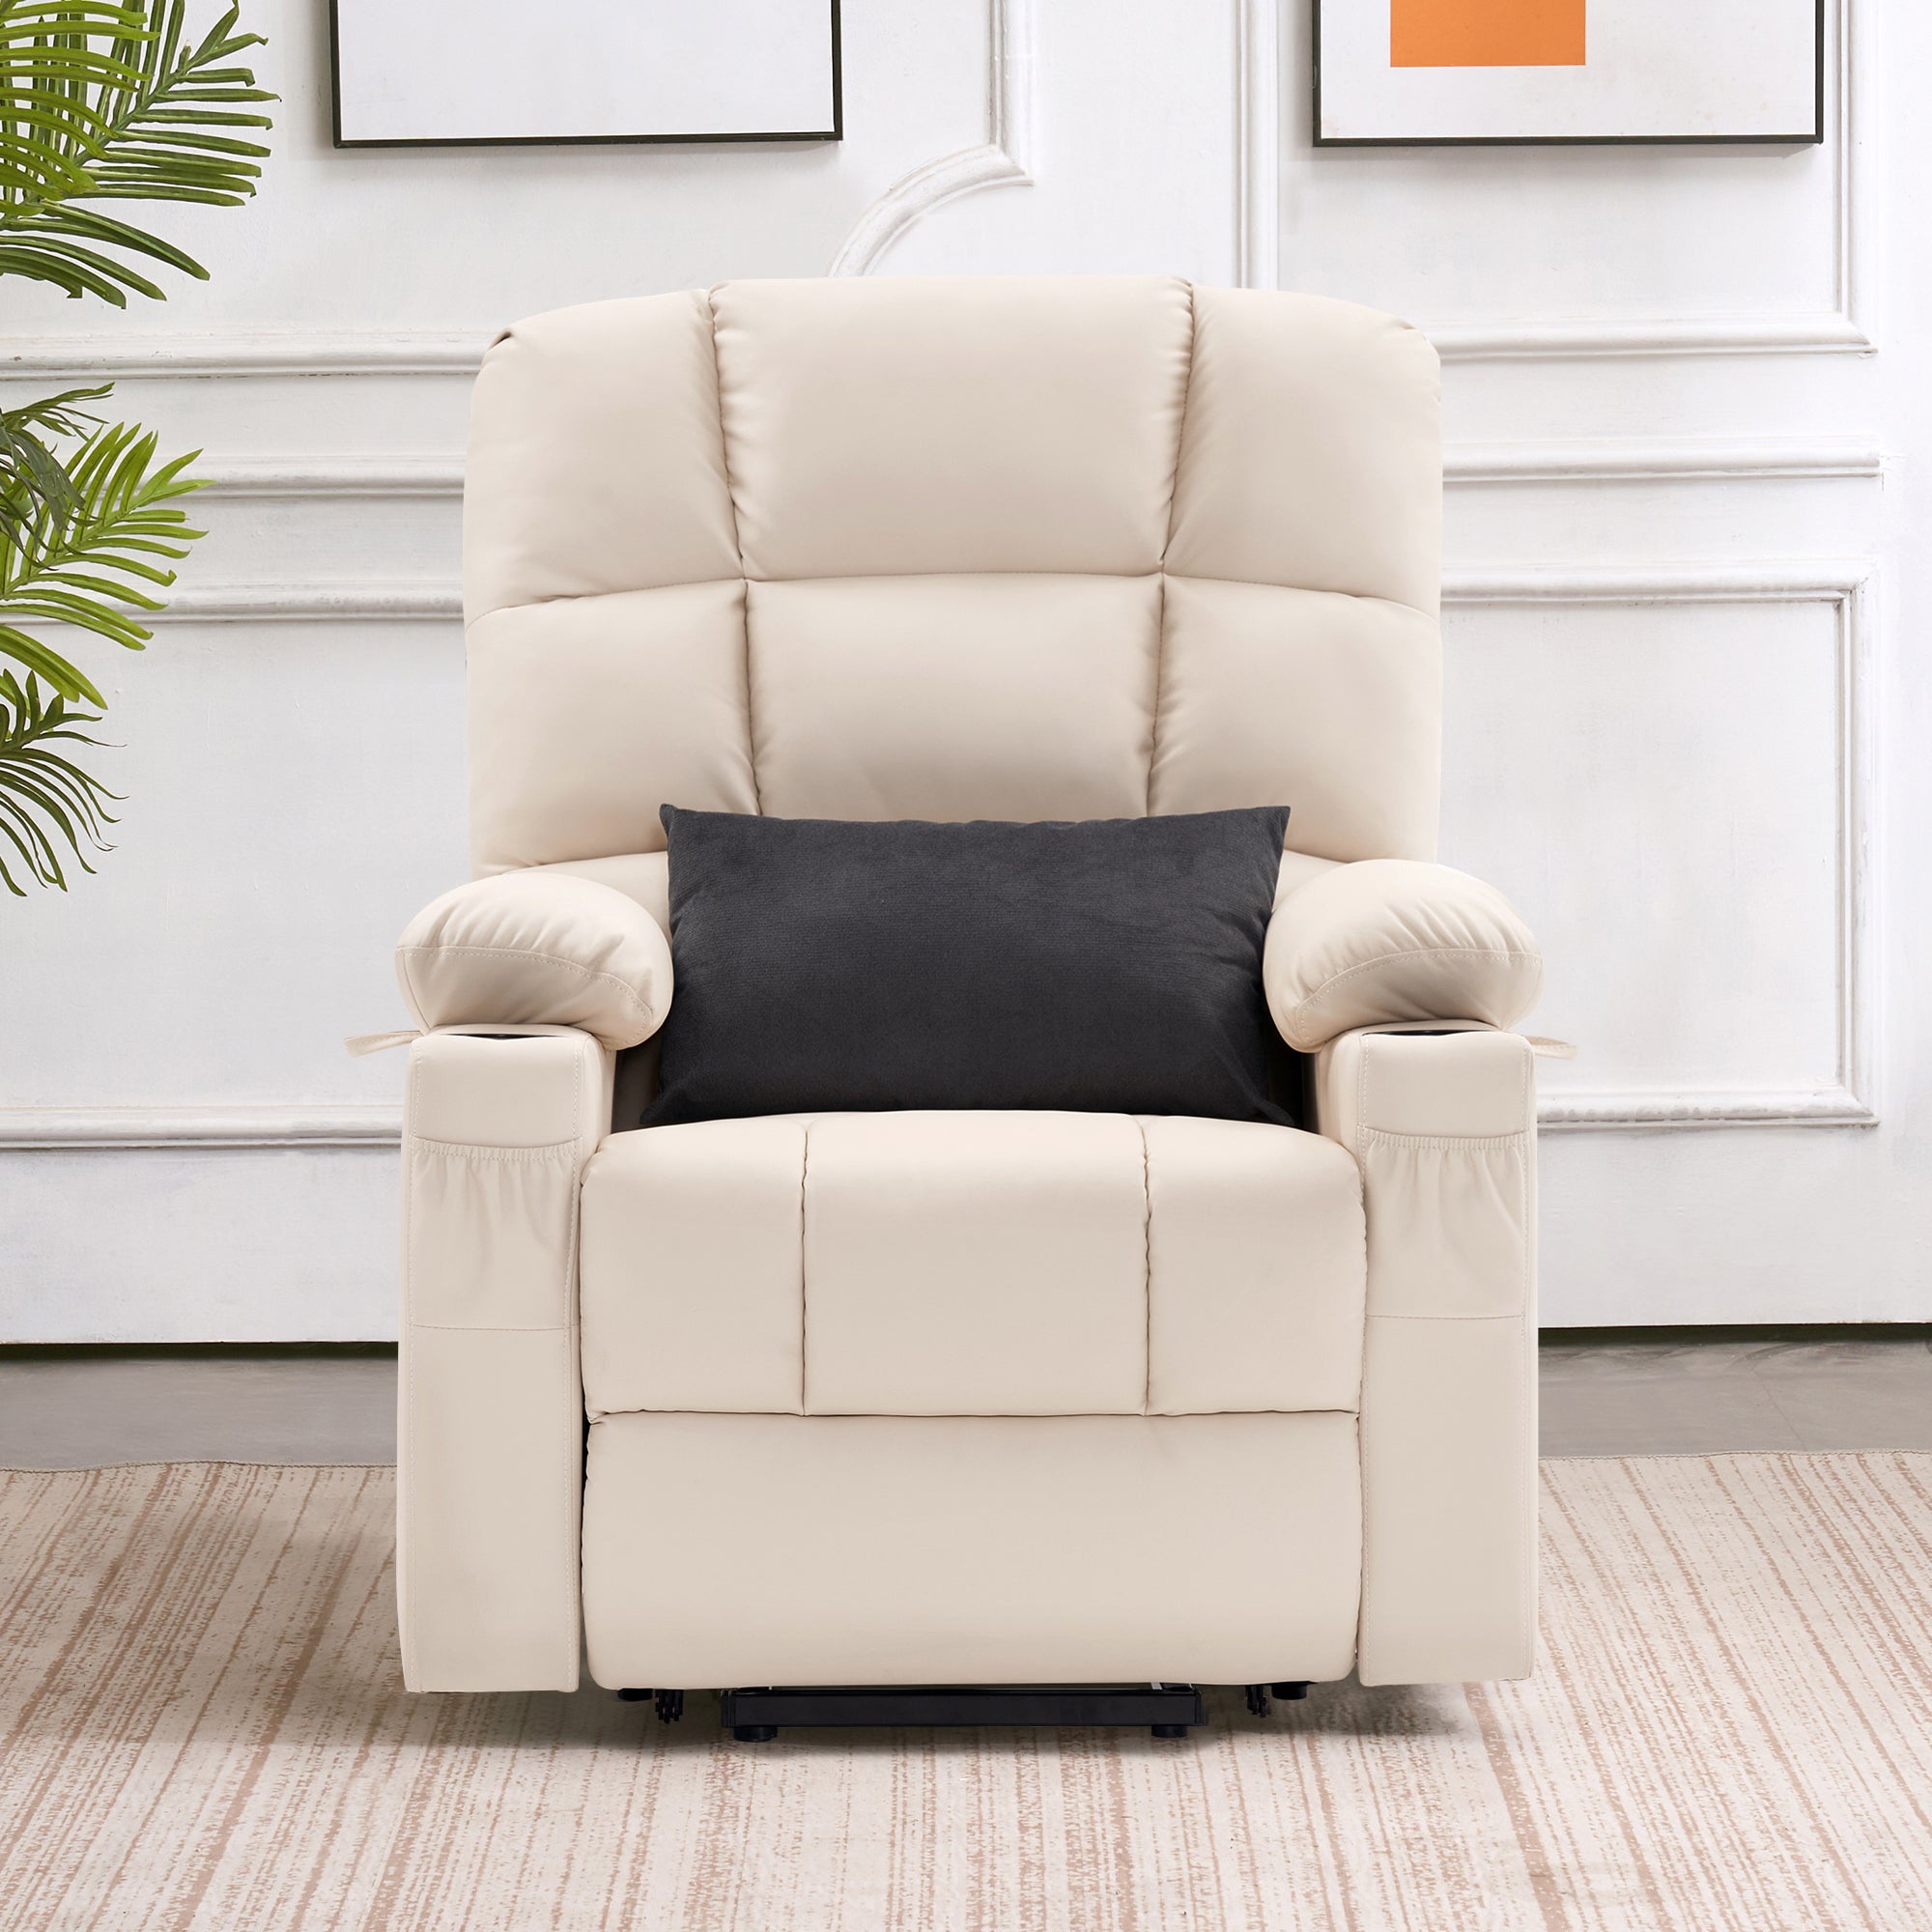 MCombo Dual Motor Large Power Lift Recliner Chair with Massage and Heat for Elderly Big and Tall People, Infinite Position, Extended Footrest, Faux Leather 7680 Series